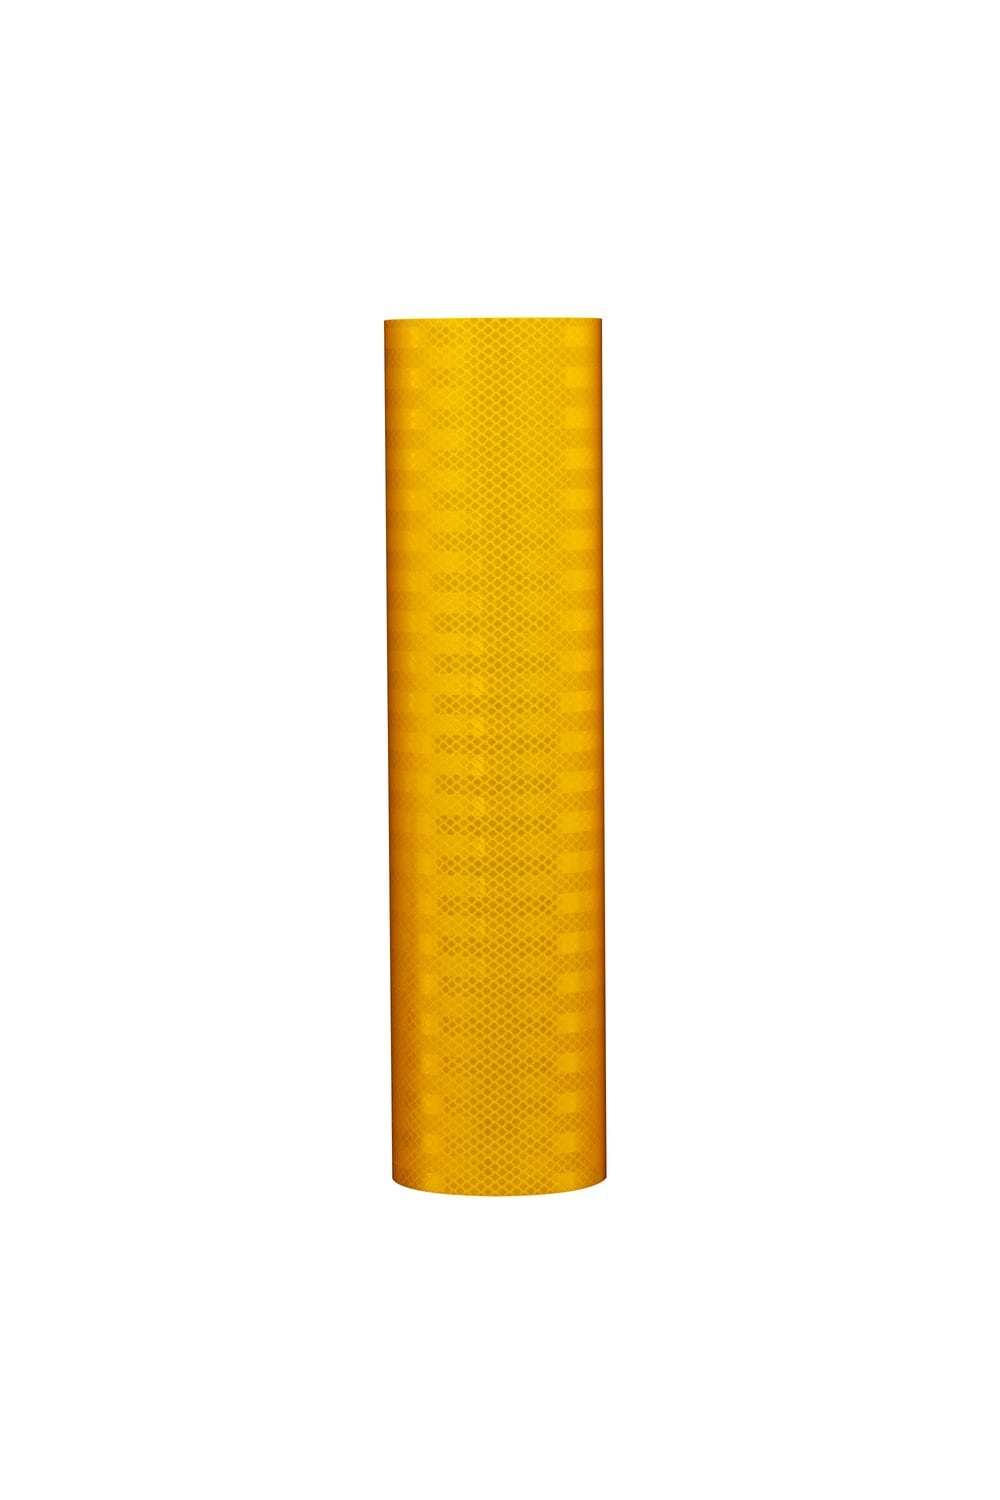 7100038702 - 3M Flexible Prismatic Reflective Sheeting 3311 Yellow, Configurable
roll